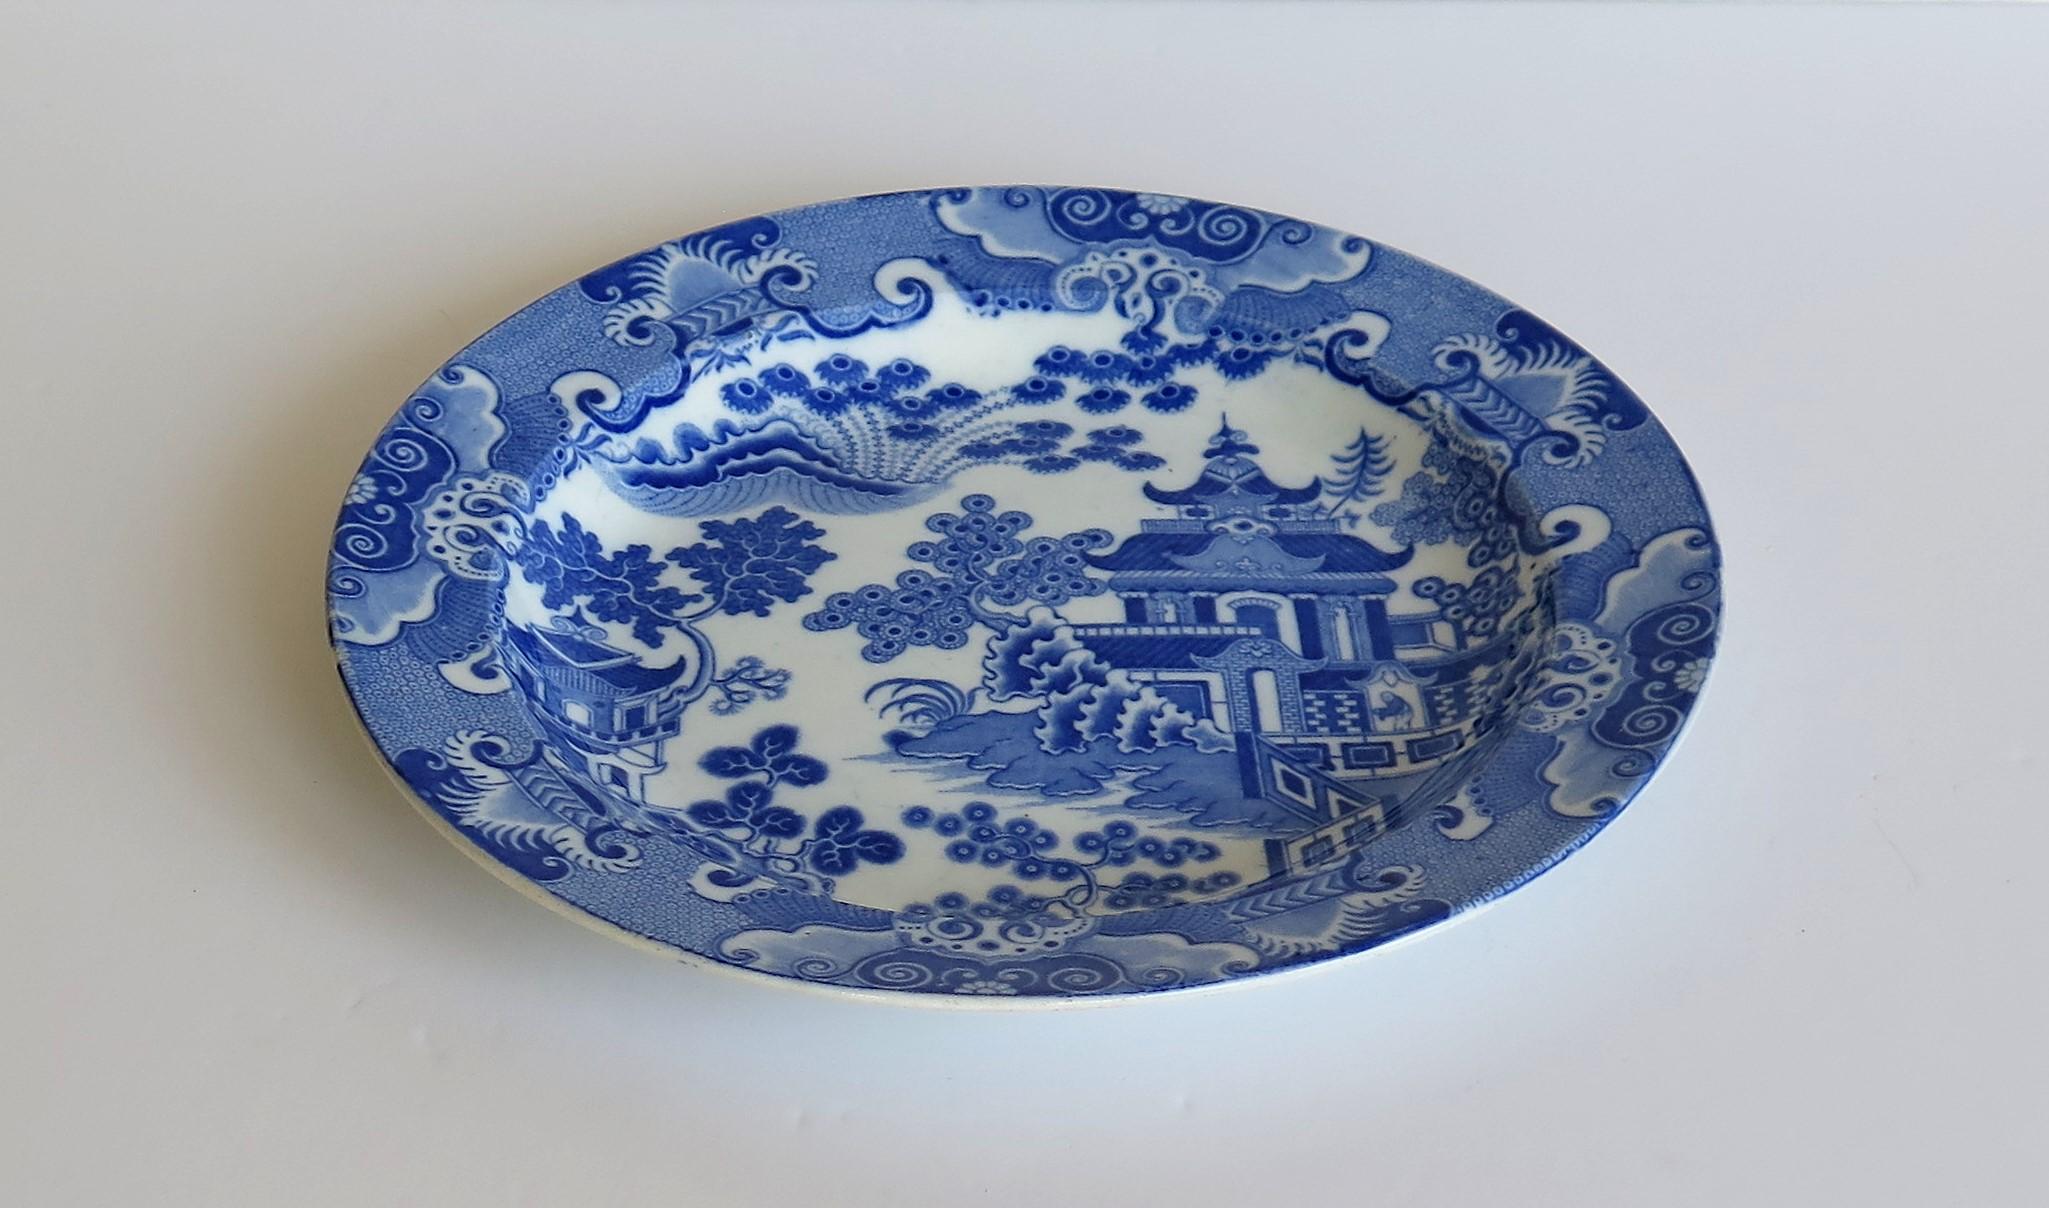 Glazed Fine Early Spode Pearlware Plate Blue and White Pagoda Pattern, circa 1805